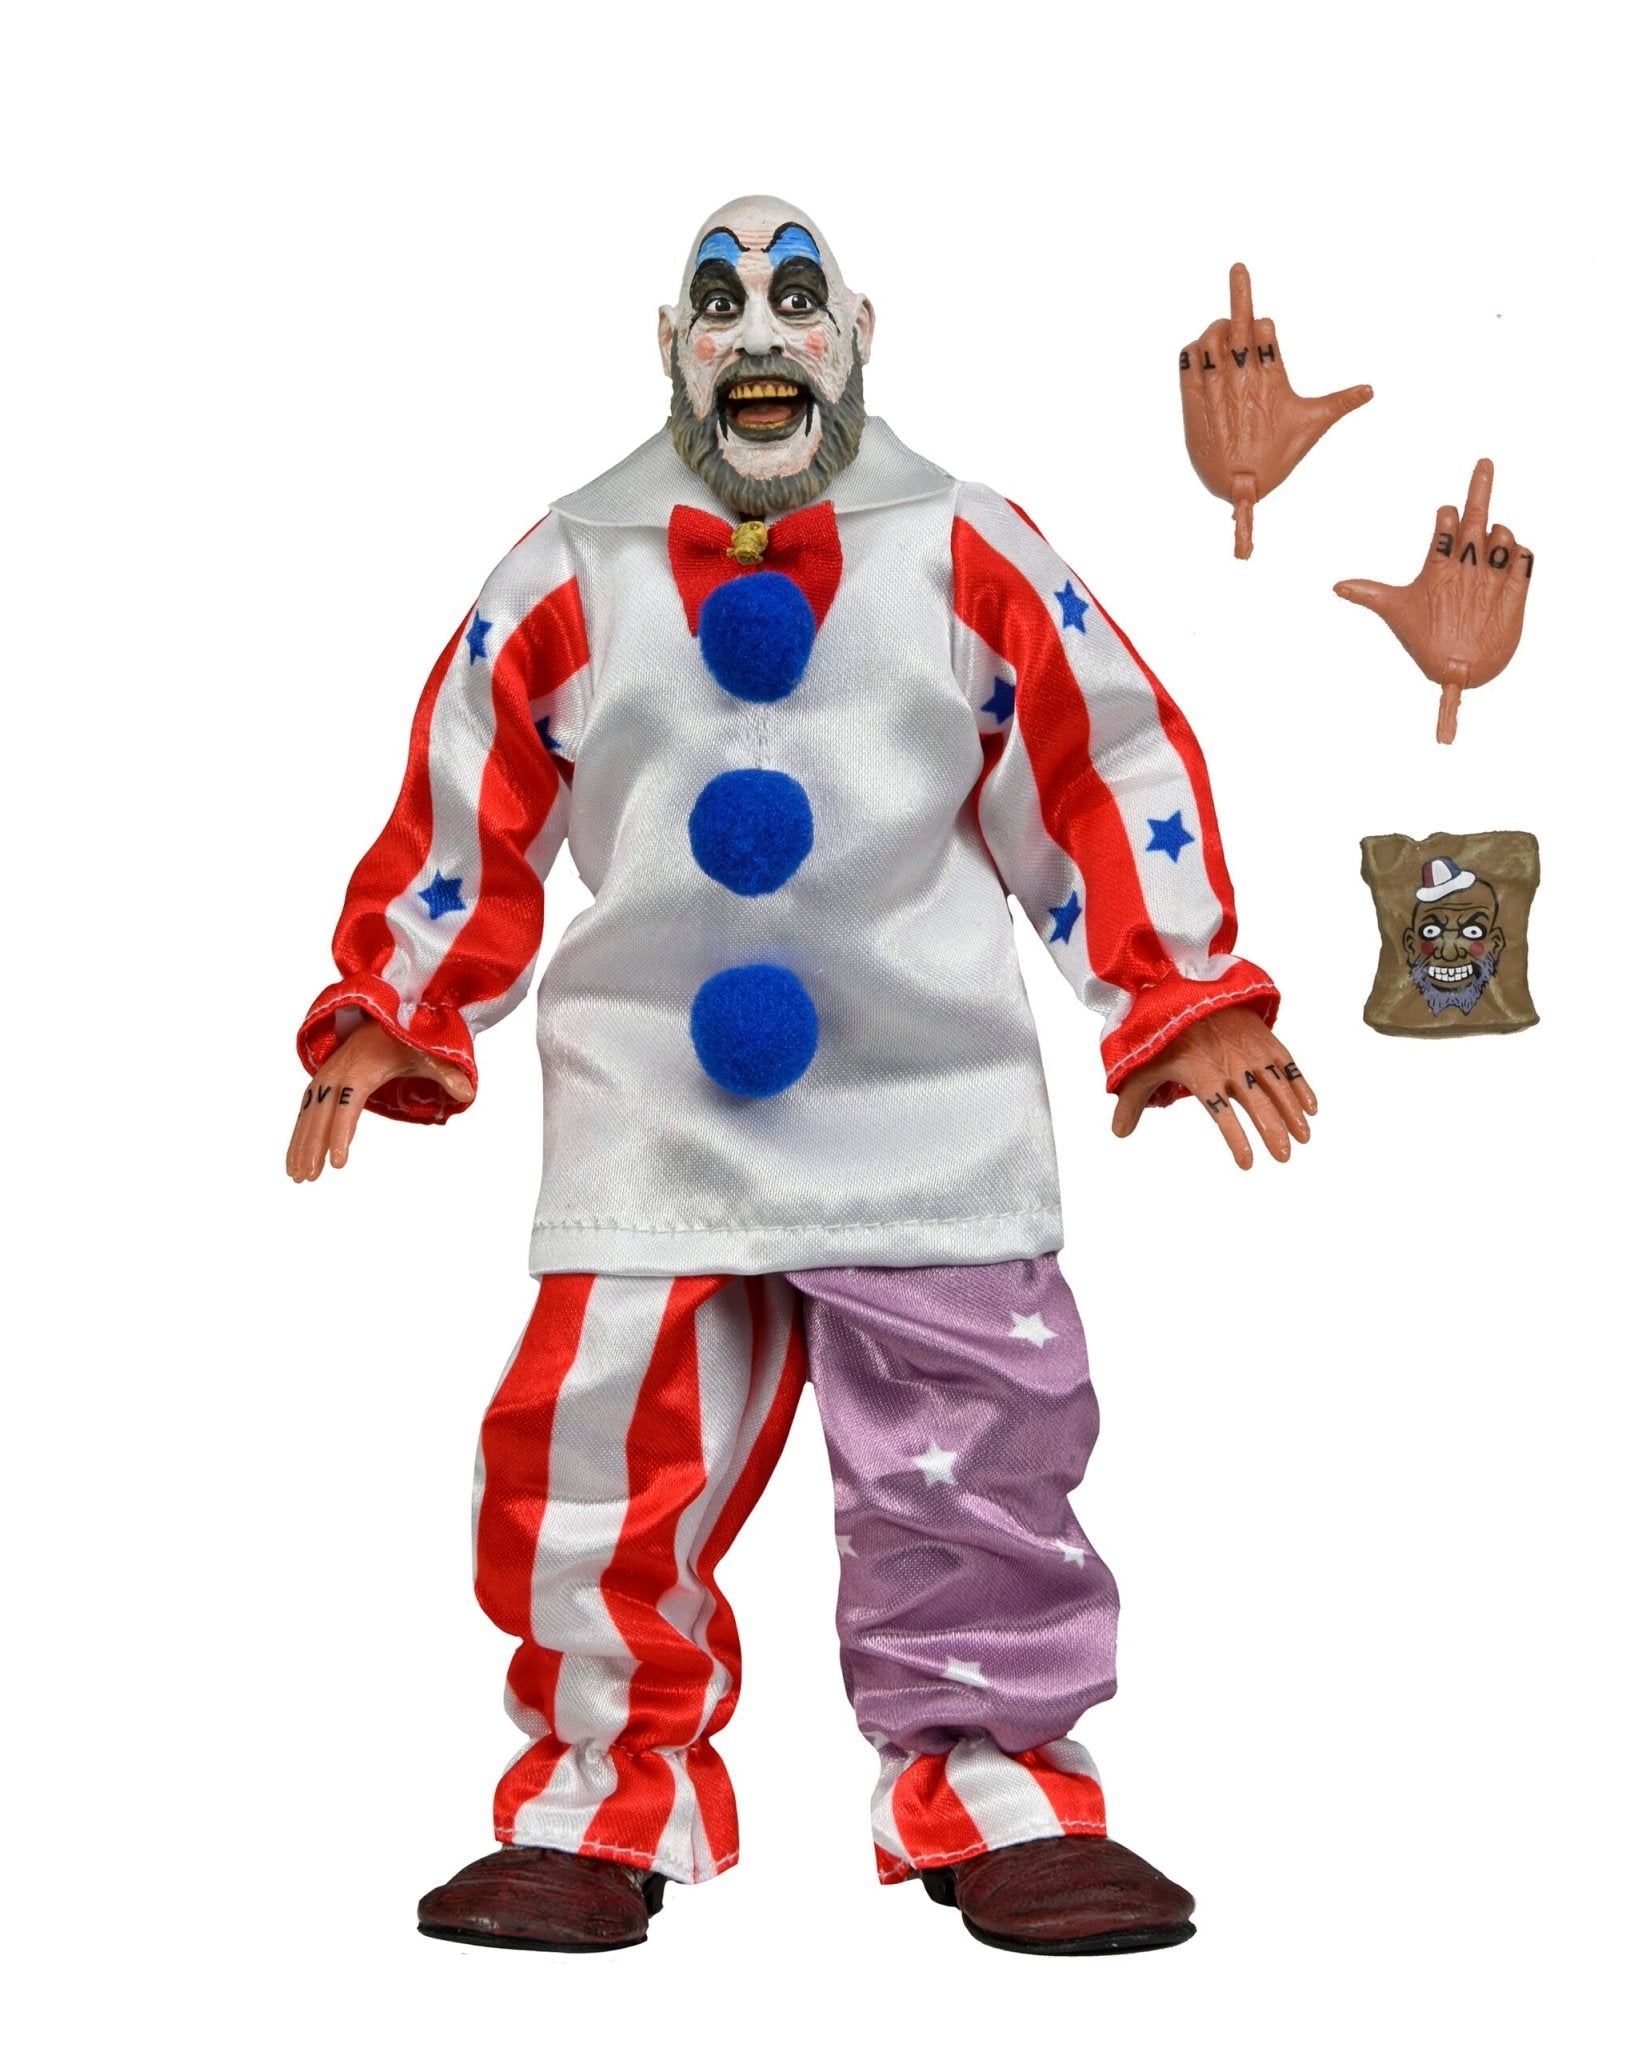 NECA House of 1000 Corpses (Captain Spaulding) 634482399446 - King Card Canada